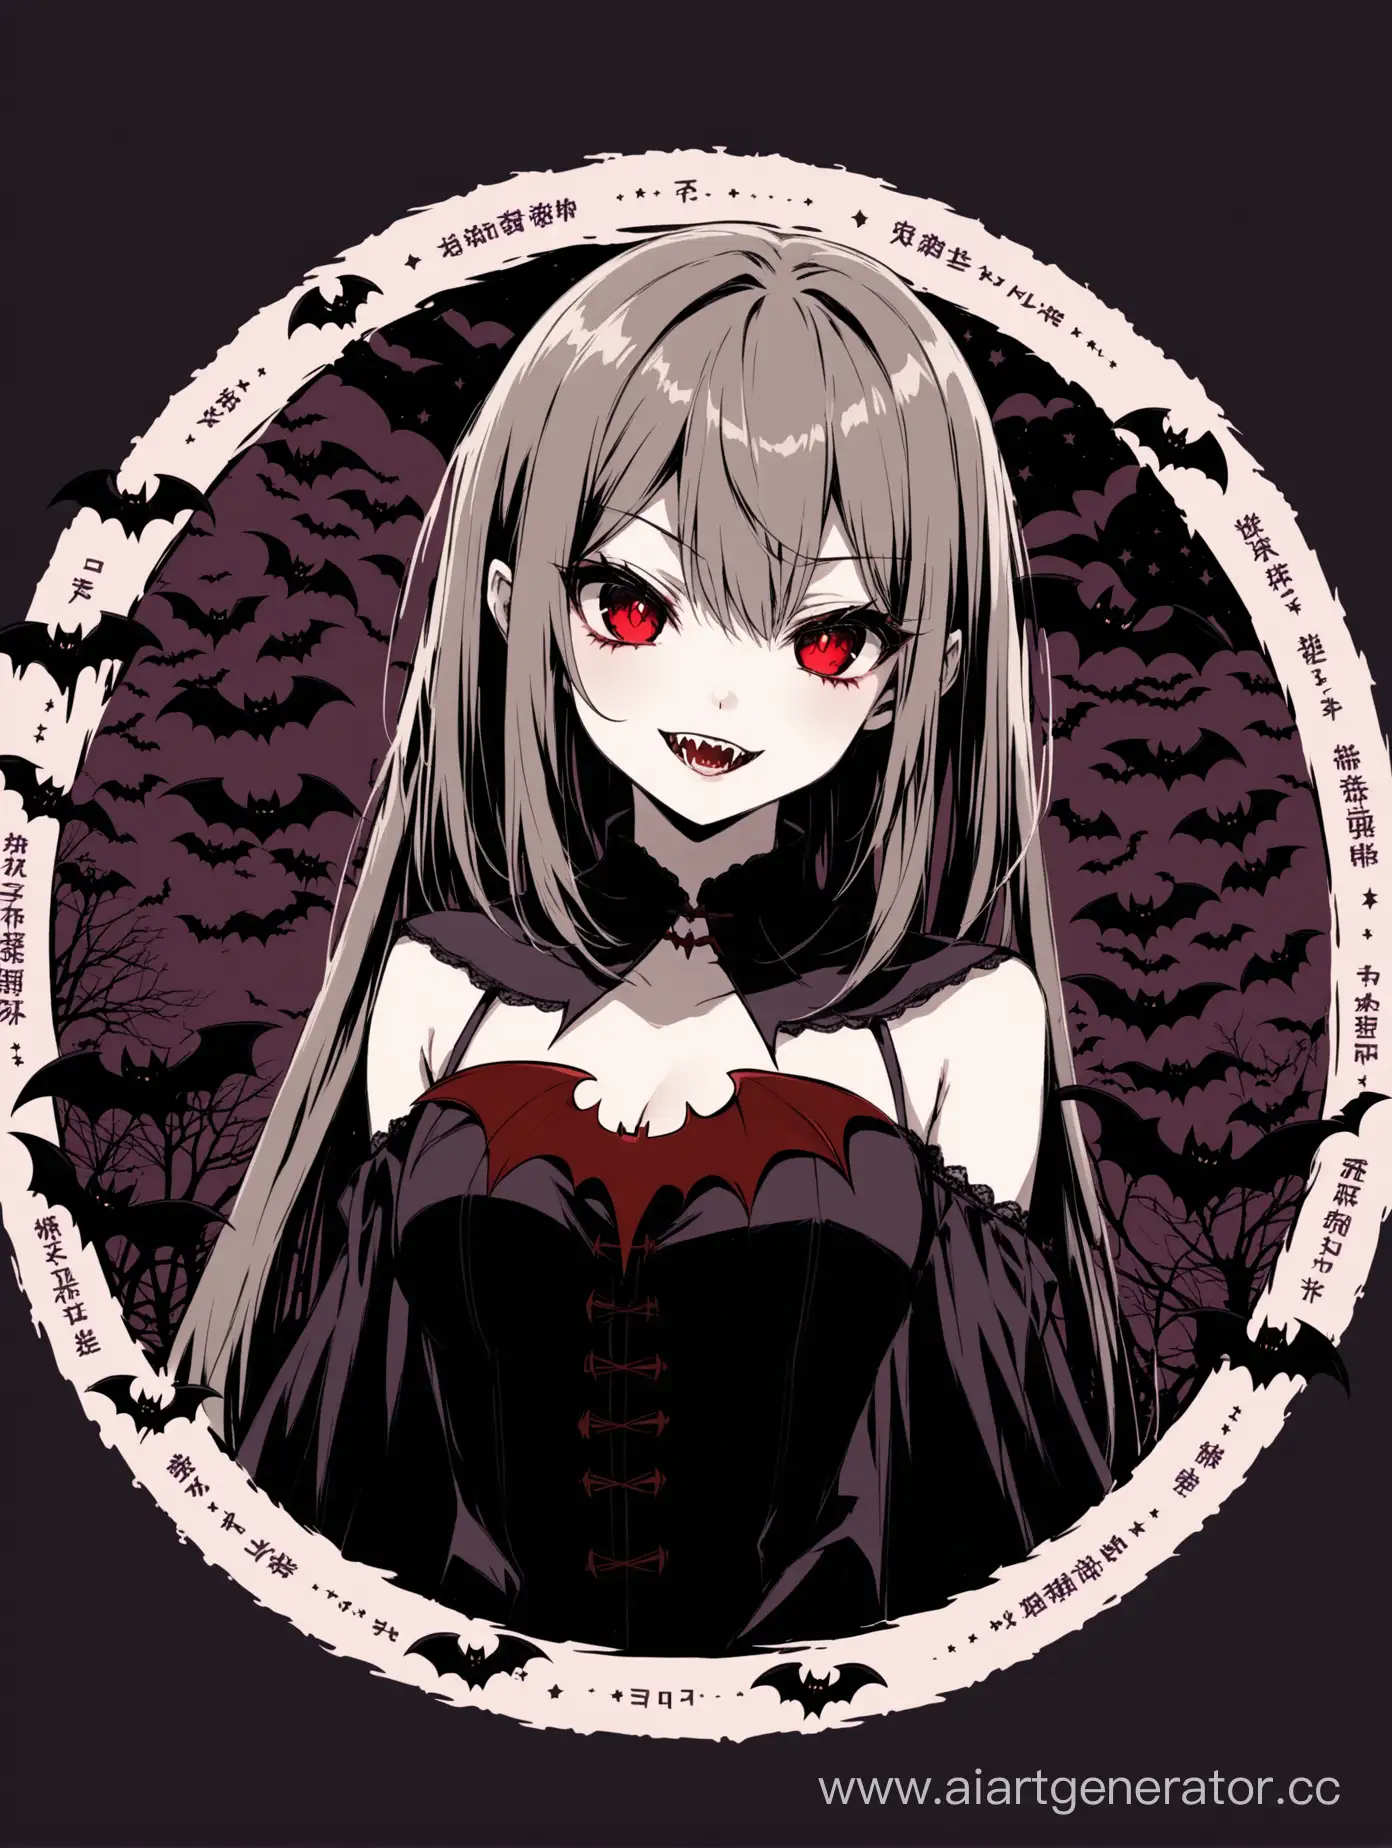 Anime vampire girl, dark tones, bats in the background, circle the girl and the inscription with an outline, in the middle of VV83